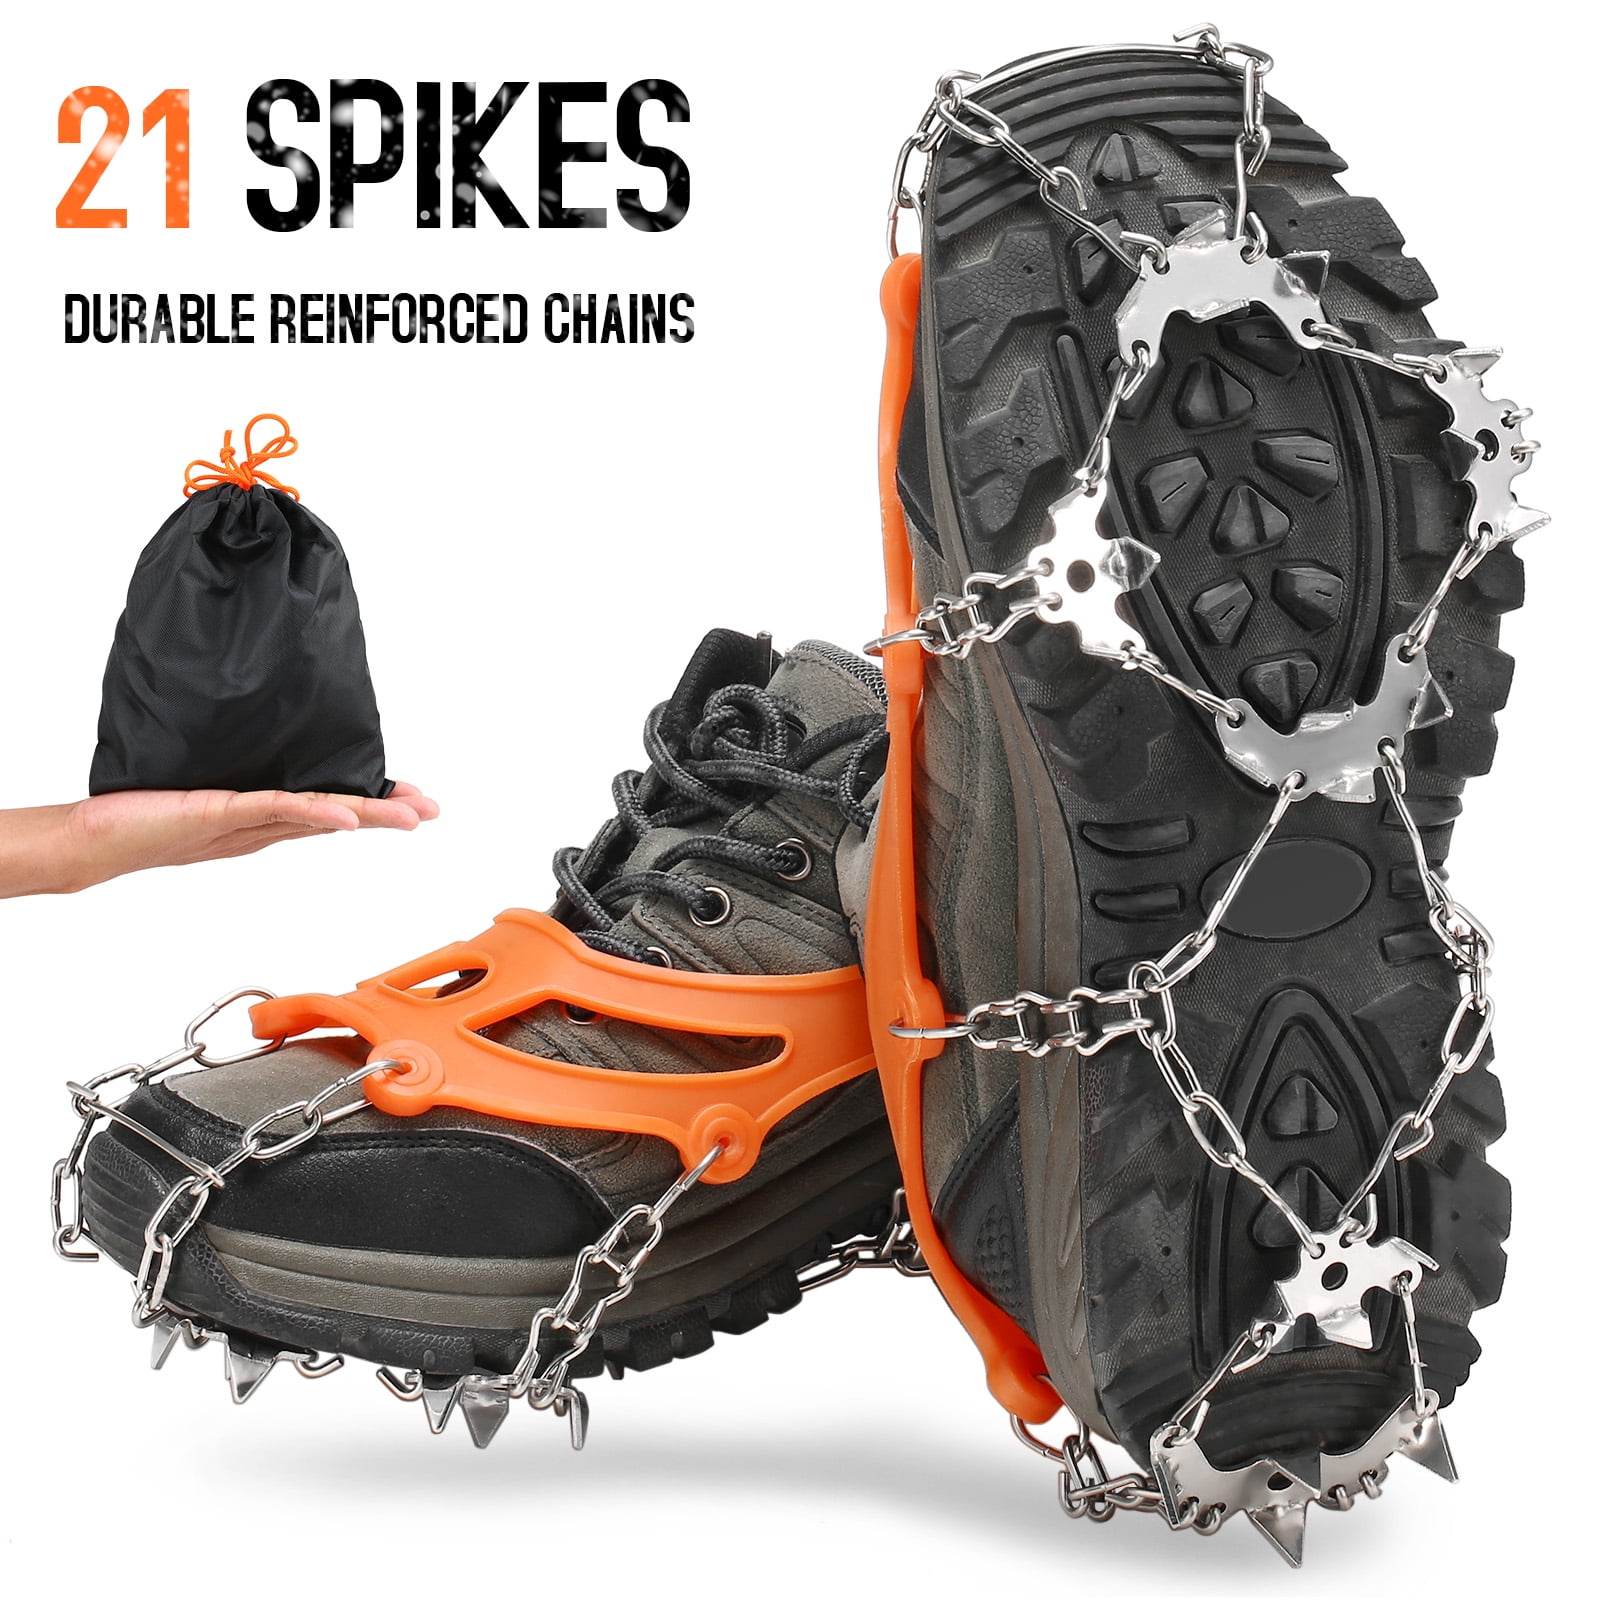 Grips Ice Grips YUEDGE 18 Teeth Stainless Steel Crampons Slip-resistant Shoes Cover Outdoor Ski Ice Snow Hiking Climbing Traction Cleats Crampons Ice Spikes 